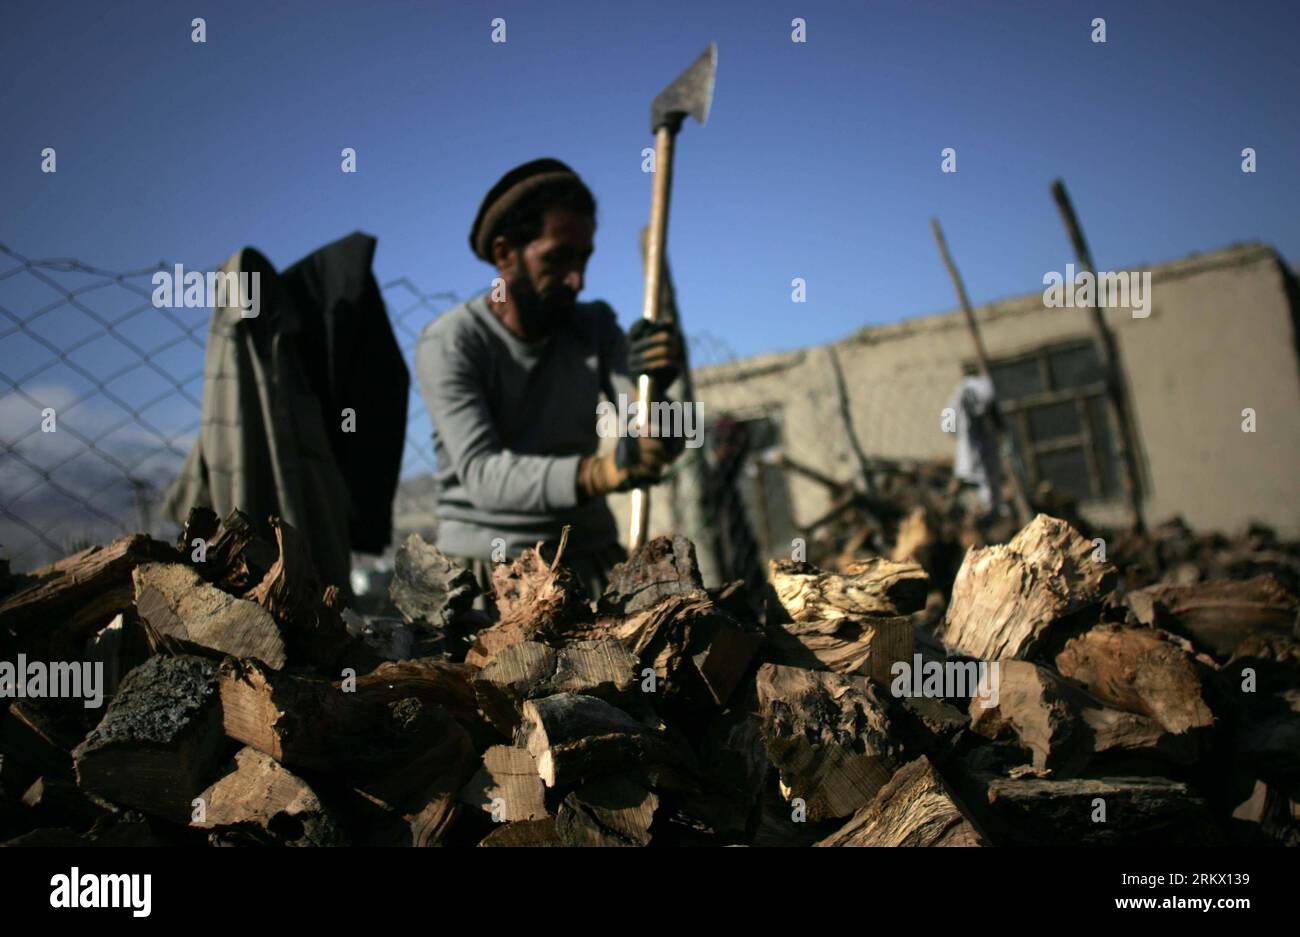 Bildnummer: 58852518  Datum: 29.11.2012  Copyright: imago/Xinhua (121129) -- KABUL, Nov. 29, 2012 (Xinhua) -- An Afghan man works at a fire wood shop in Kabul, capital of Afghanistan, on Nov. 29, 2012. With the weather gets colder every day, the price of fire, which increased almost 60% compared to last year, would continue to grow throughout the winter. (Xinhua/Ahmad Massoud) (rh) AFGHANISTAN-KABUL-FIREWOOD PUBLICATIONxNOTxINxCHN Wirtschaft Arbeit Holz Brennholz Holzfäller Fotostory xas x0x 2012 quer Aufmacher premiumd      58852518 Date 29 11 2012 Copyright Imago XINHUA  Kabul Nov 29 2012 XI Stock Photo